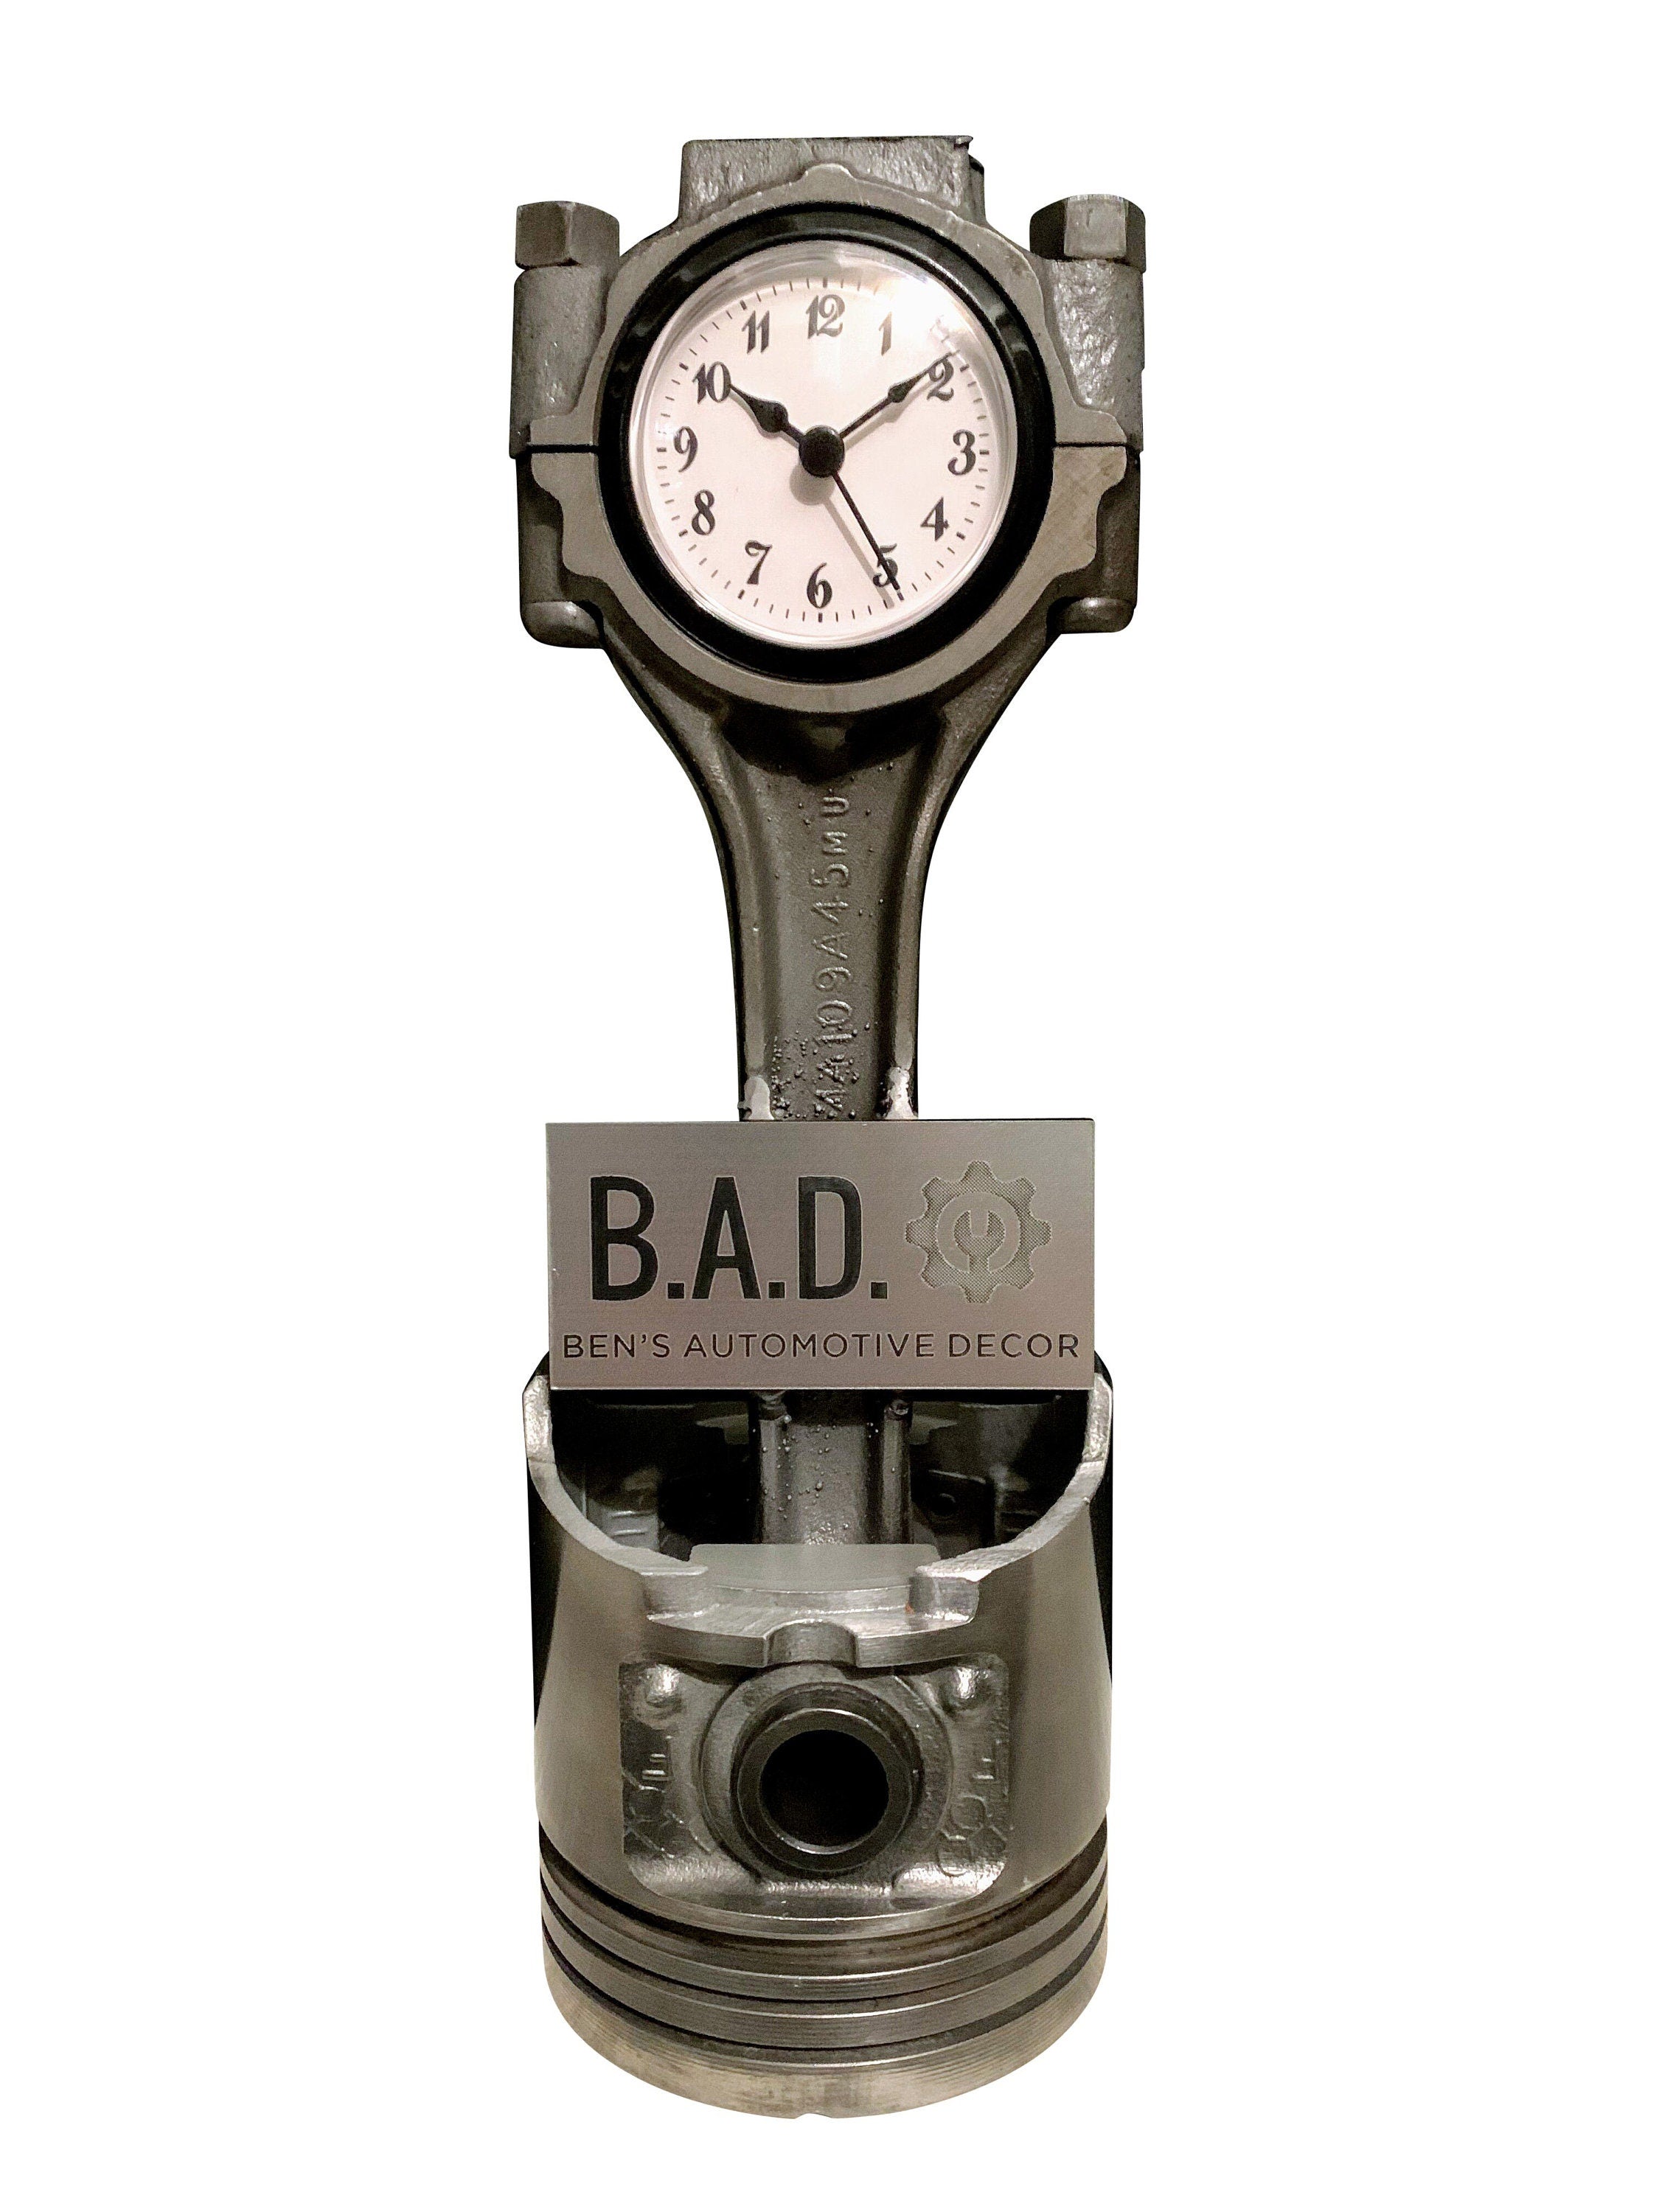 A piston clock finished in gunmetal gray with a black clock ring that includes a custom engraved plaque that reads, "B.A.D, Ben's Automotive Decor".